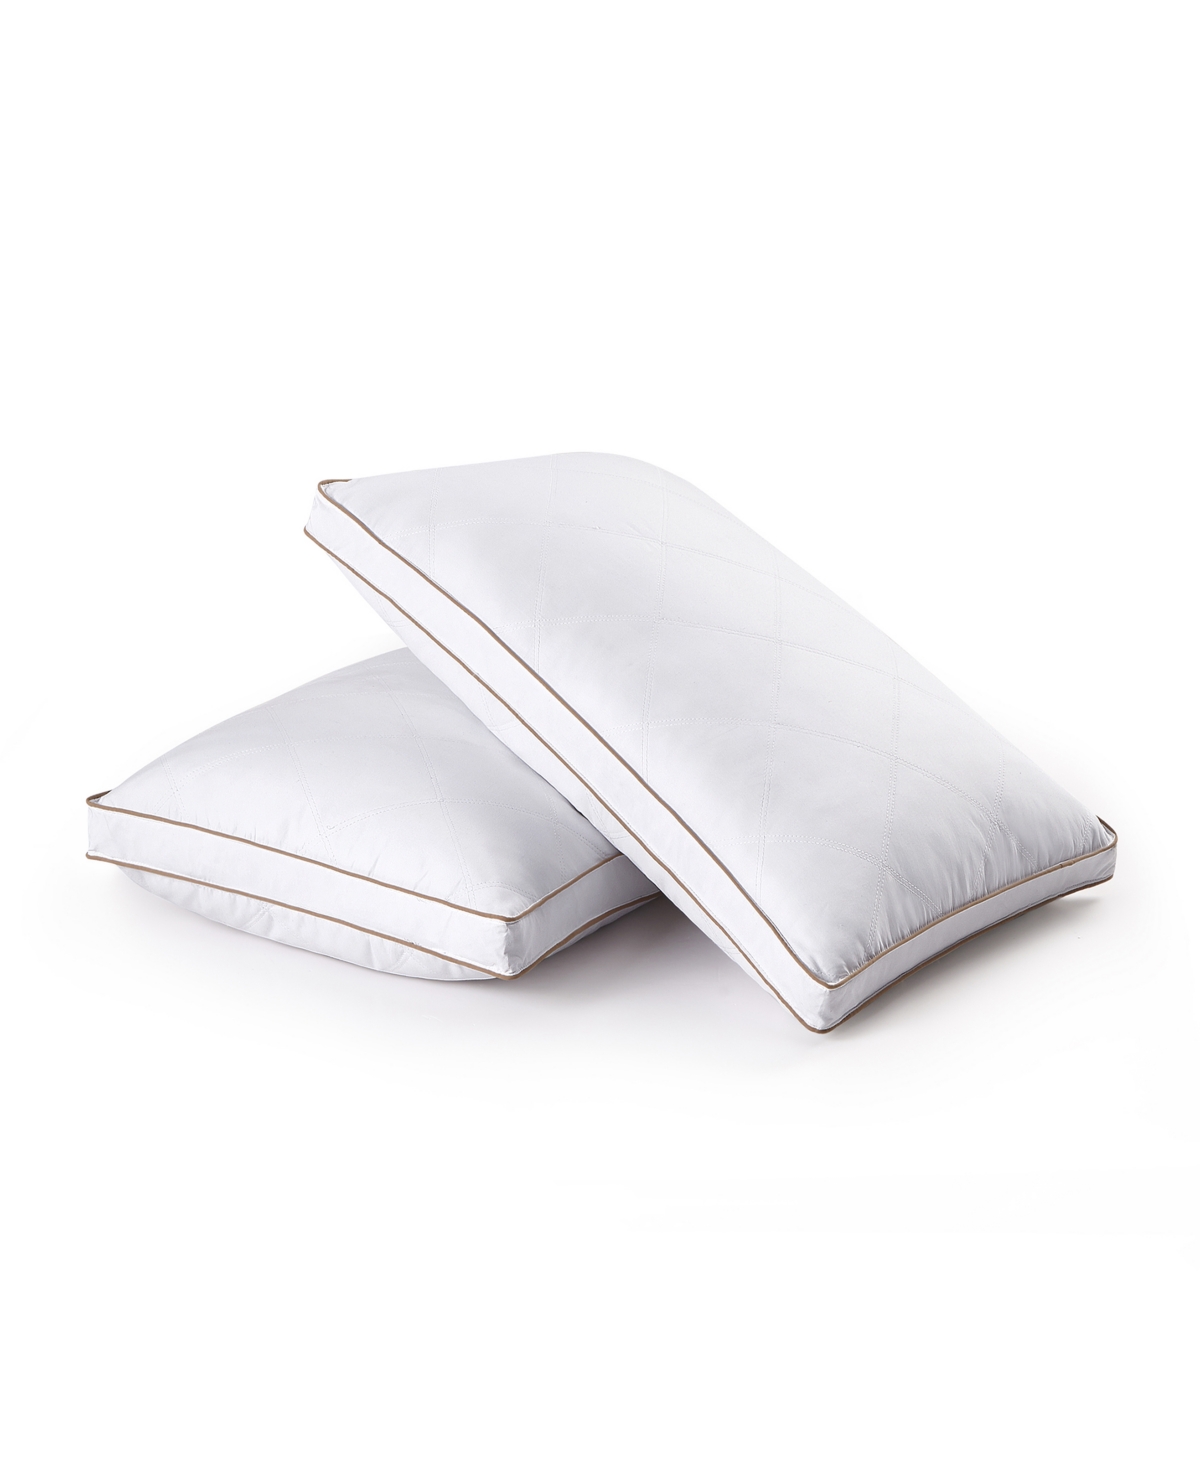 Unikome 2 Piece Diamond Quilted Goose Feather Gusseted Bed Pillows Set, Queen In White